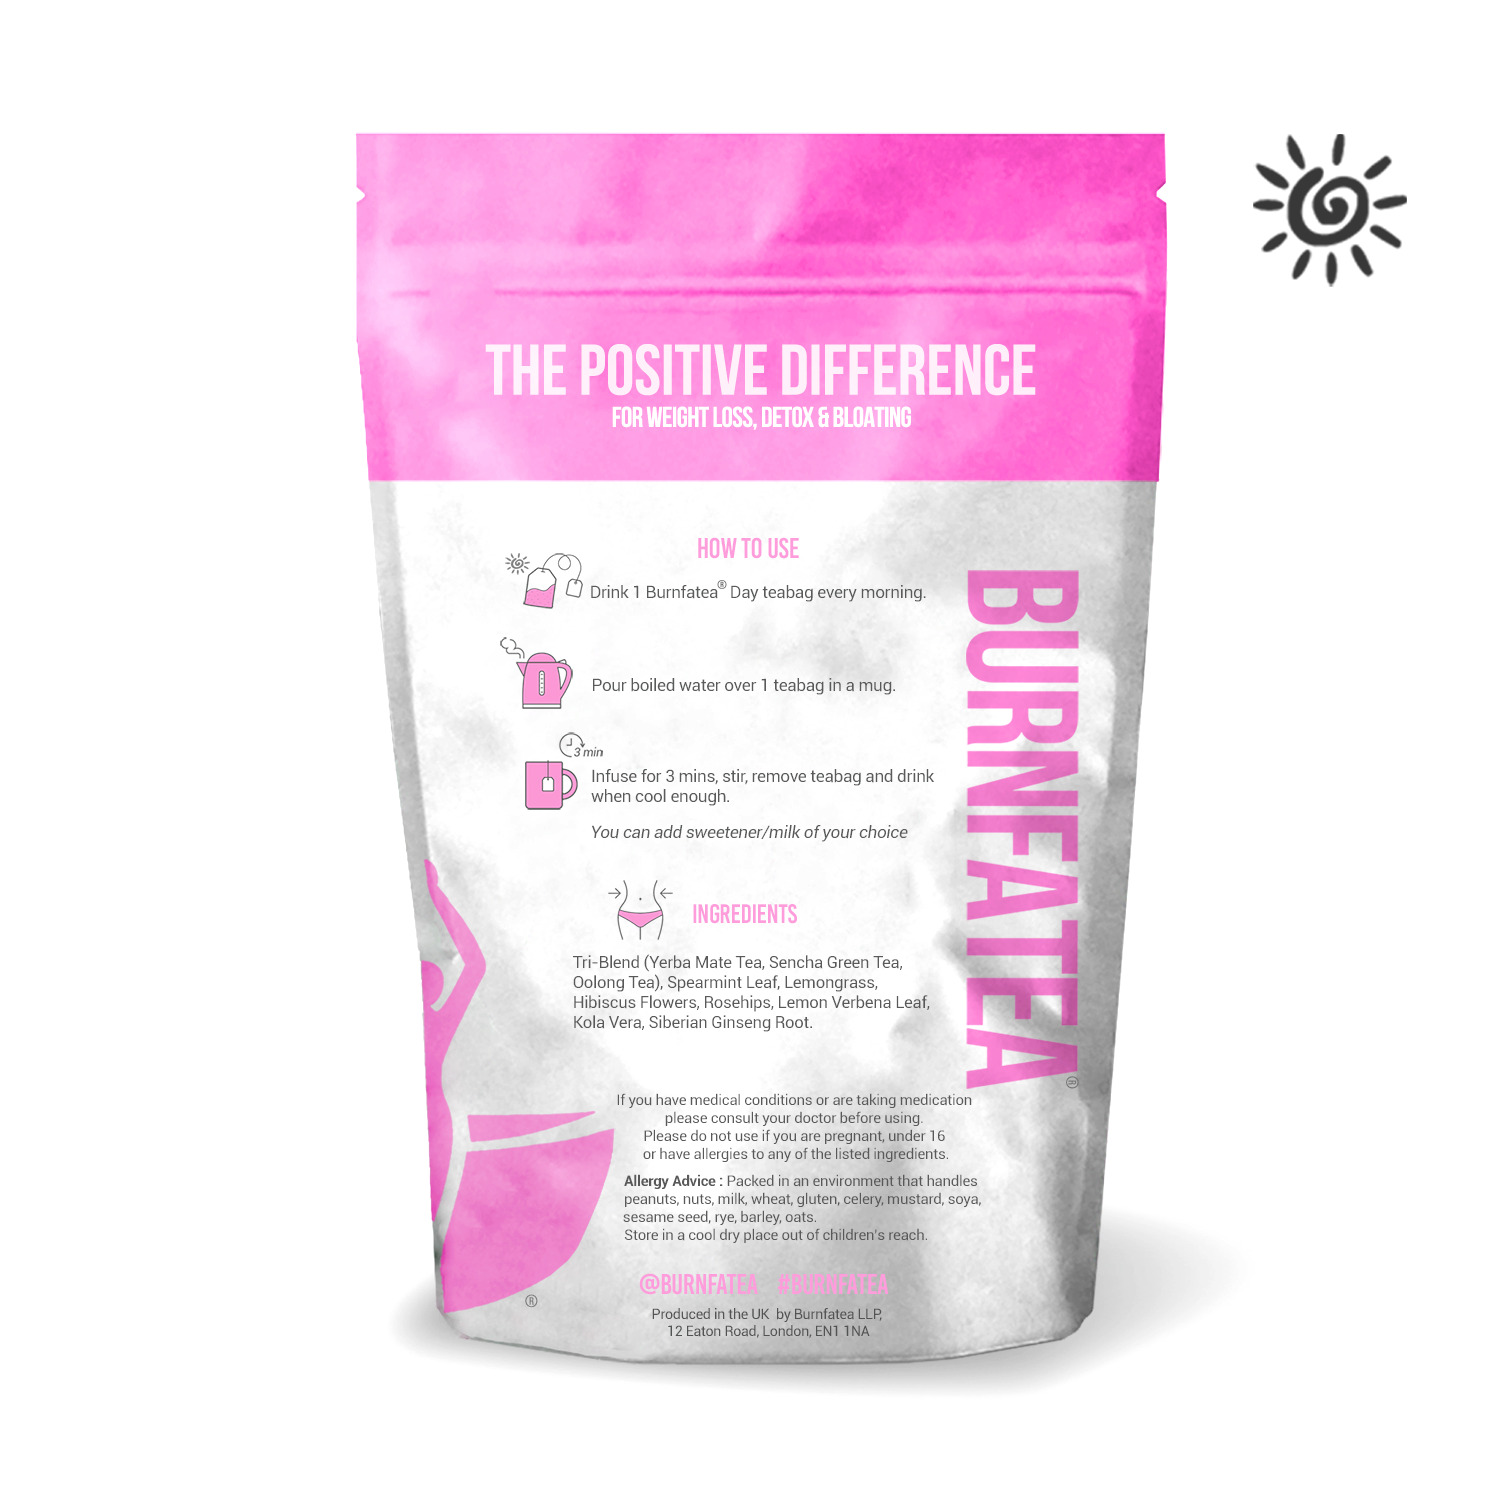 BurnFatTea 28 Day Detox - Extreme Weight Loss